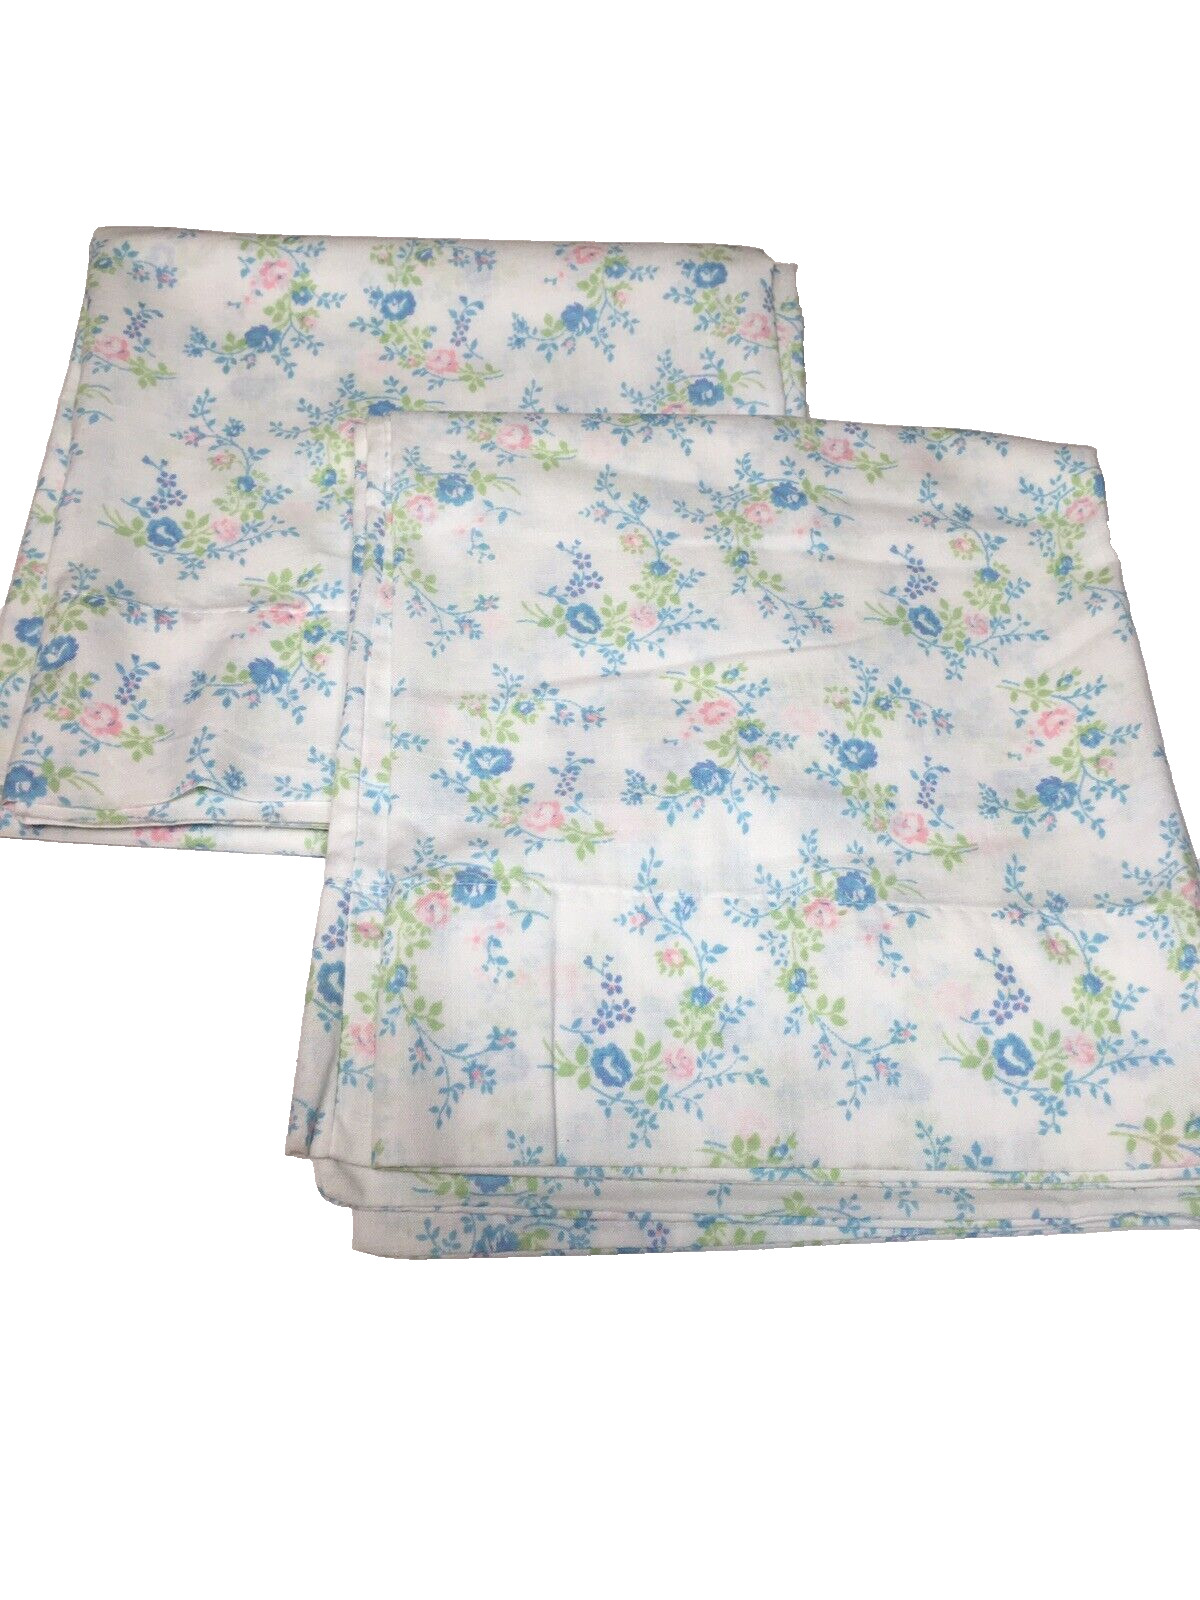 Vintage Fieldcrest Ideal Percale Floral Pink Blue King Pillowcases Set of 2 USA